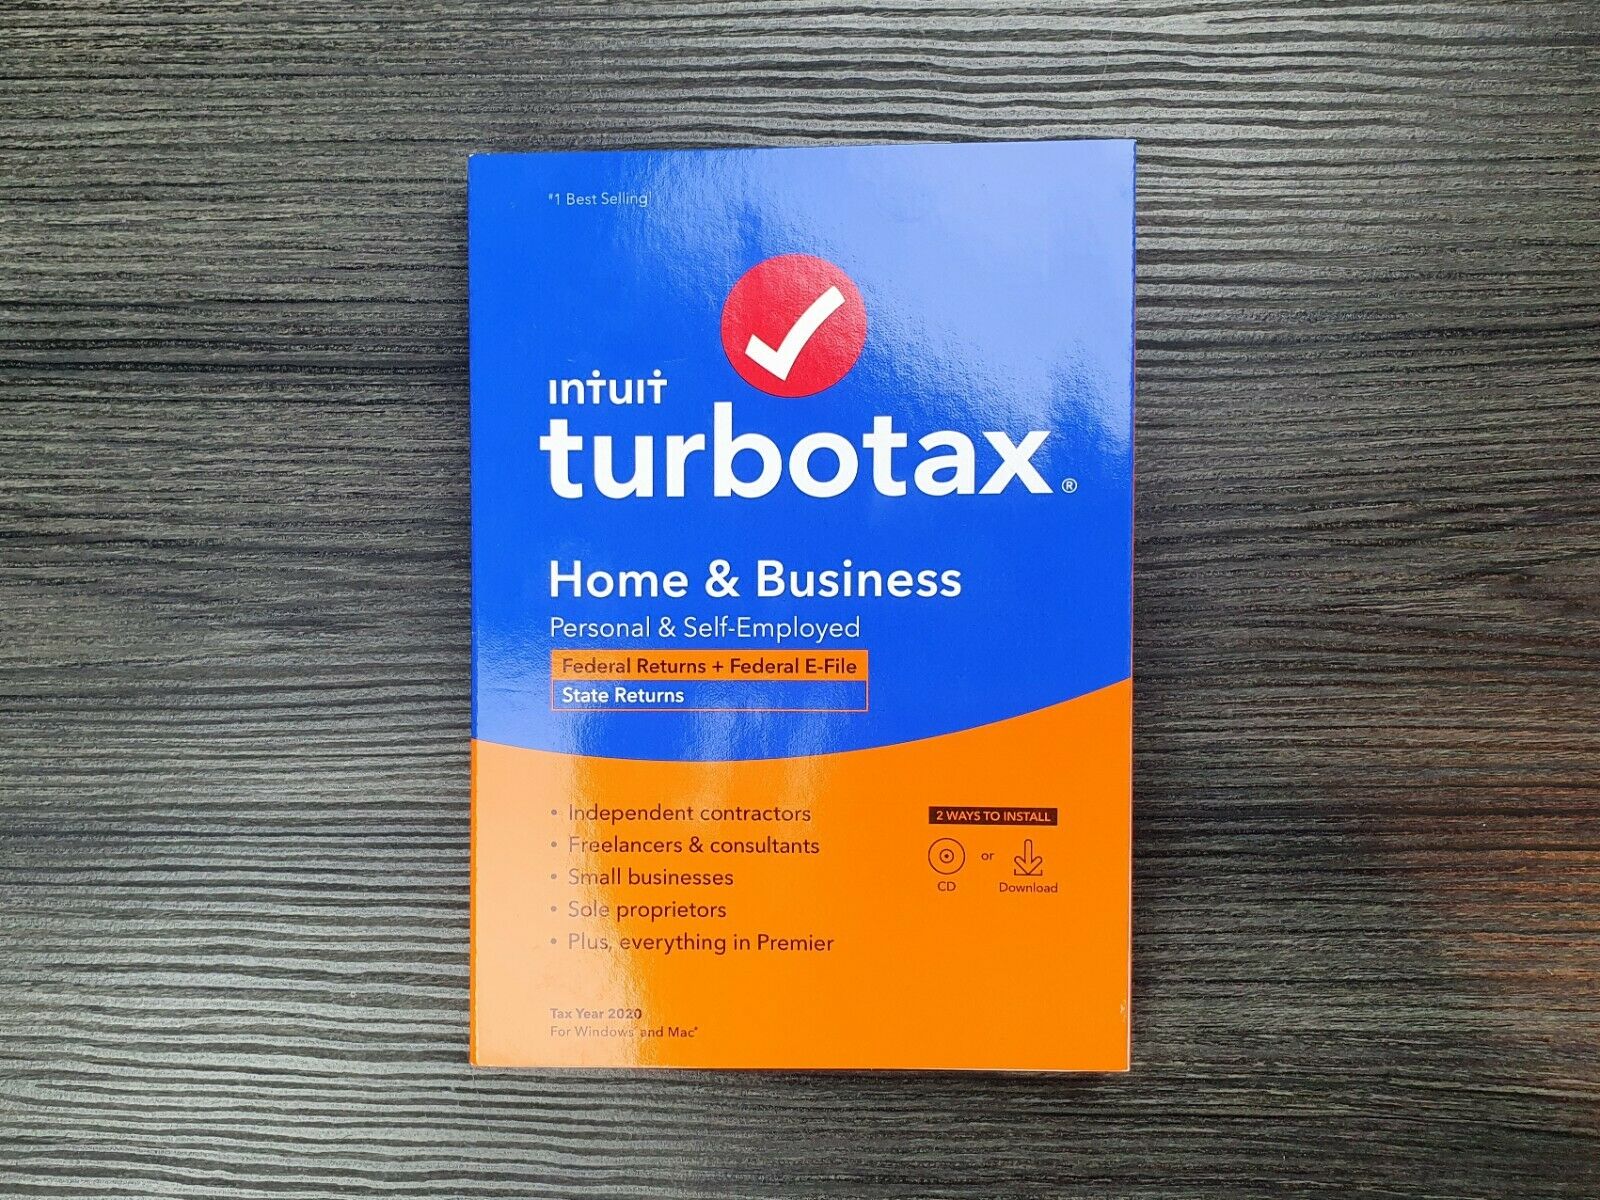 turbotax deluxe 2016 cd for windows and mac